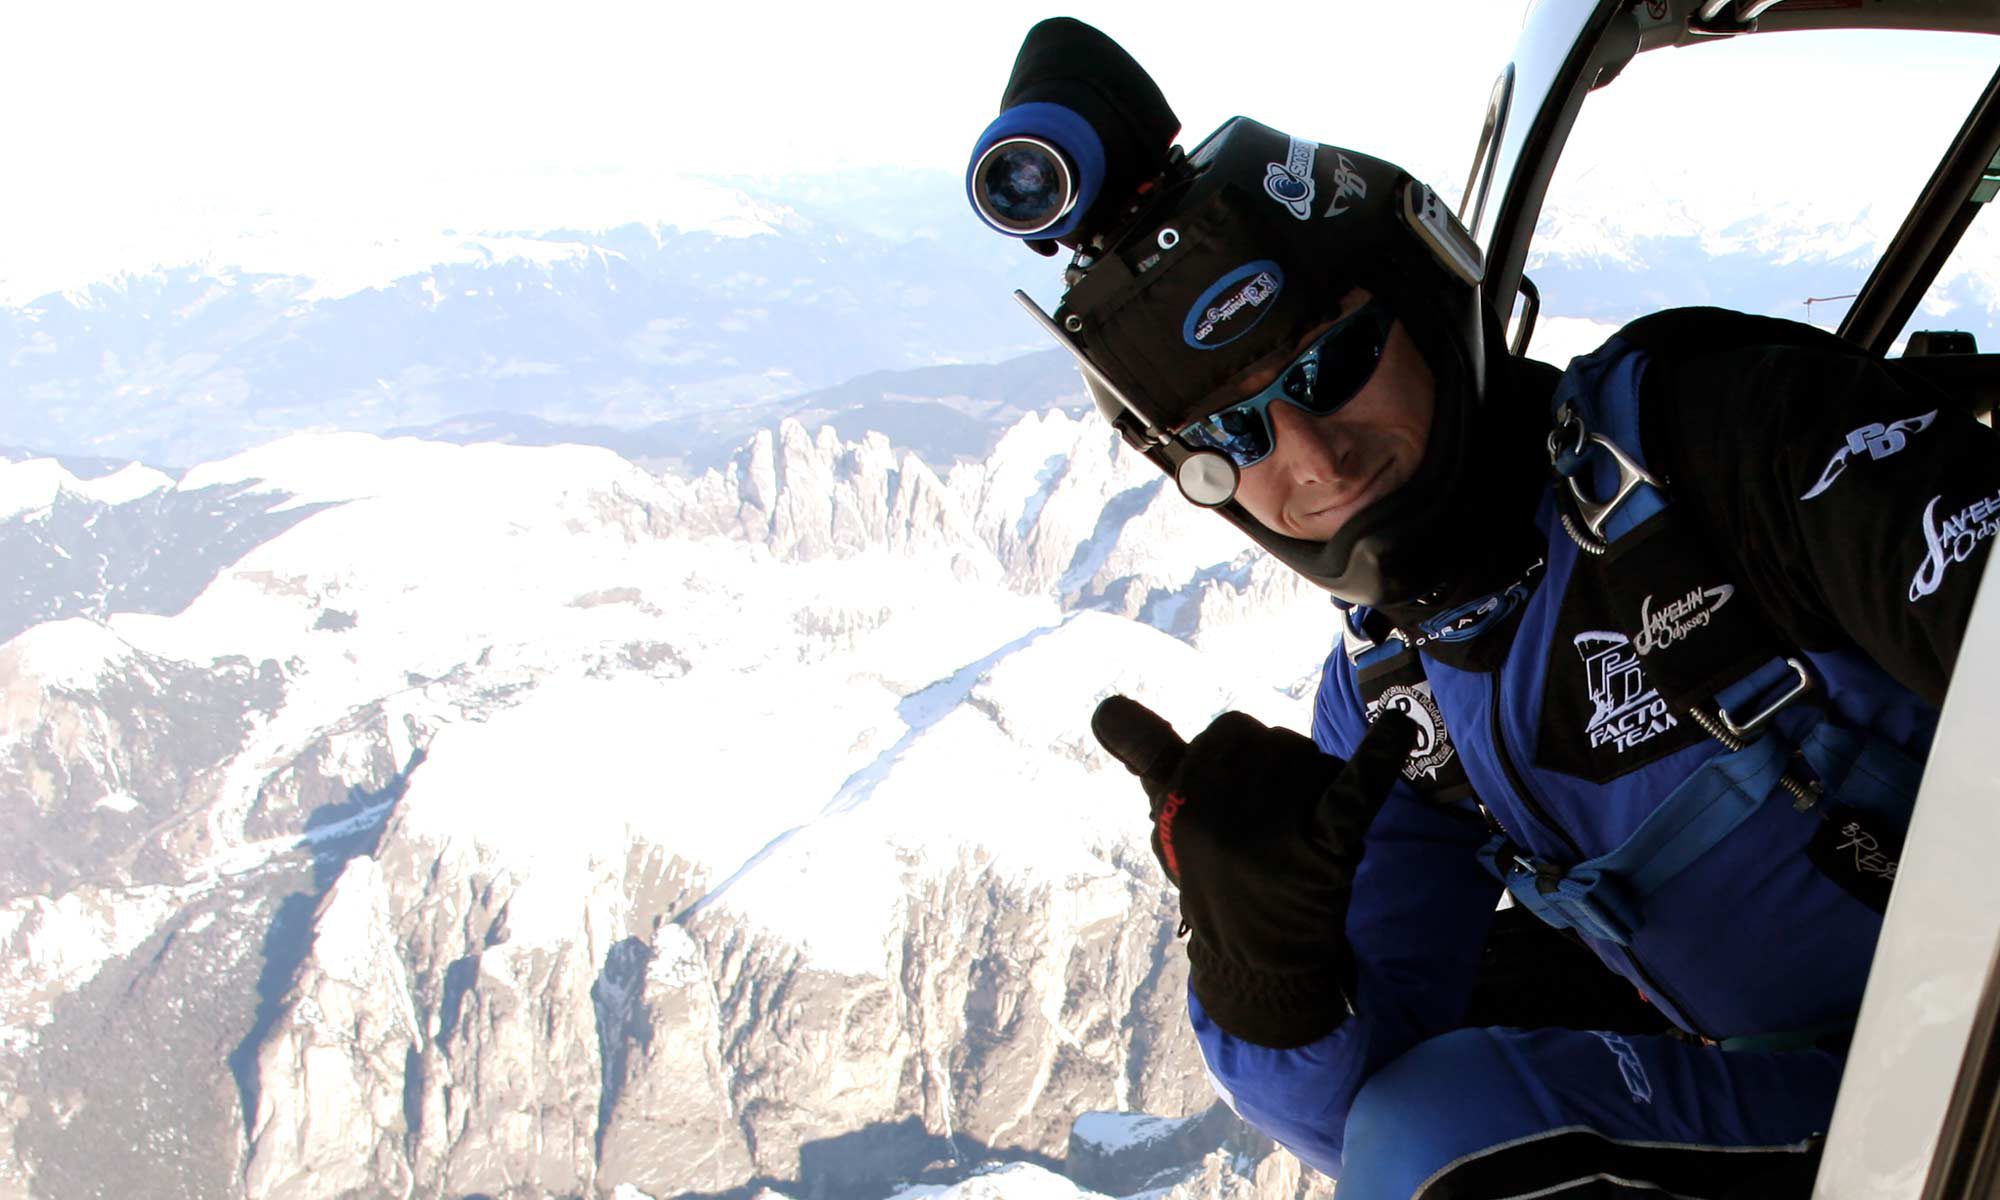 Shannon Pilcher gives thumbs up before exiting to skydive over snowy mountains